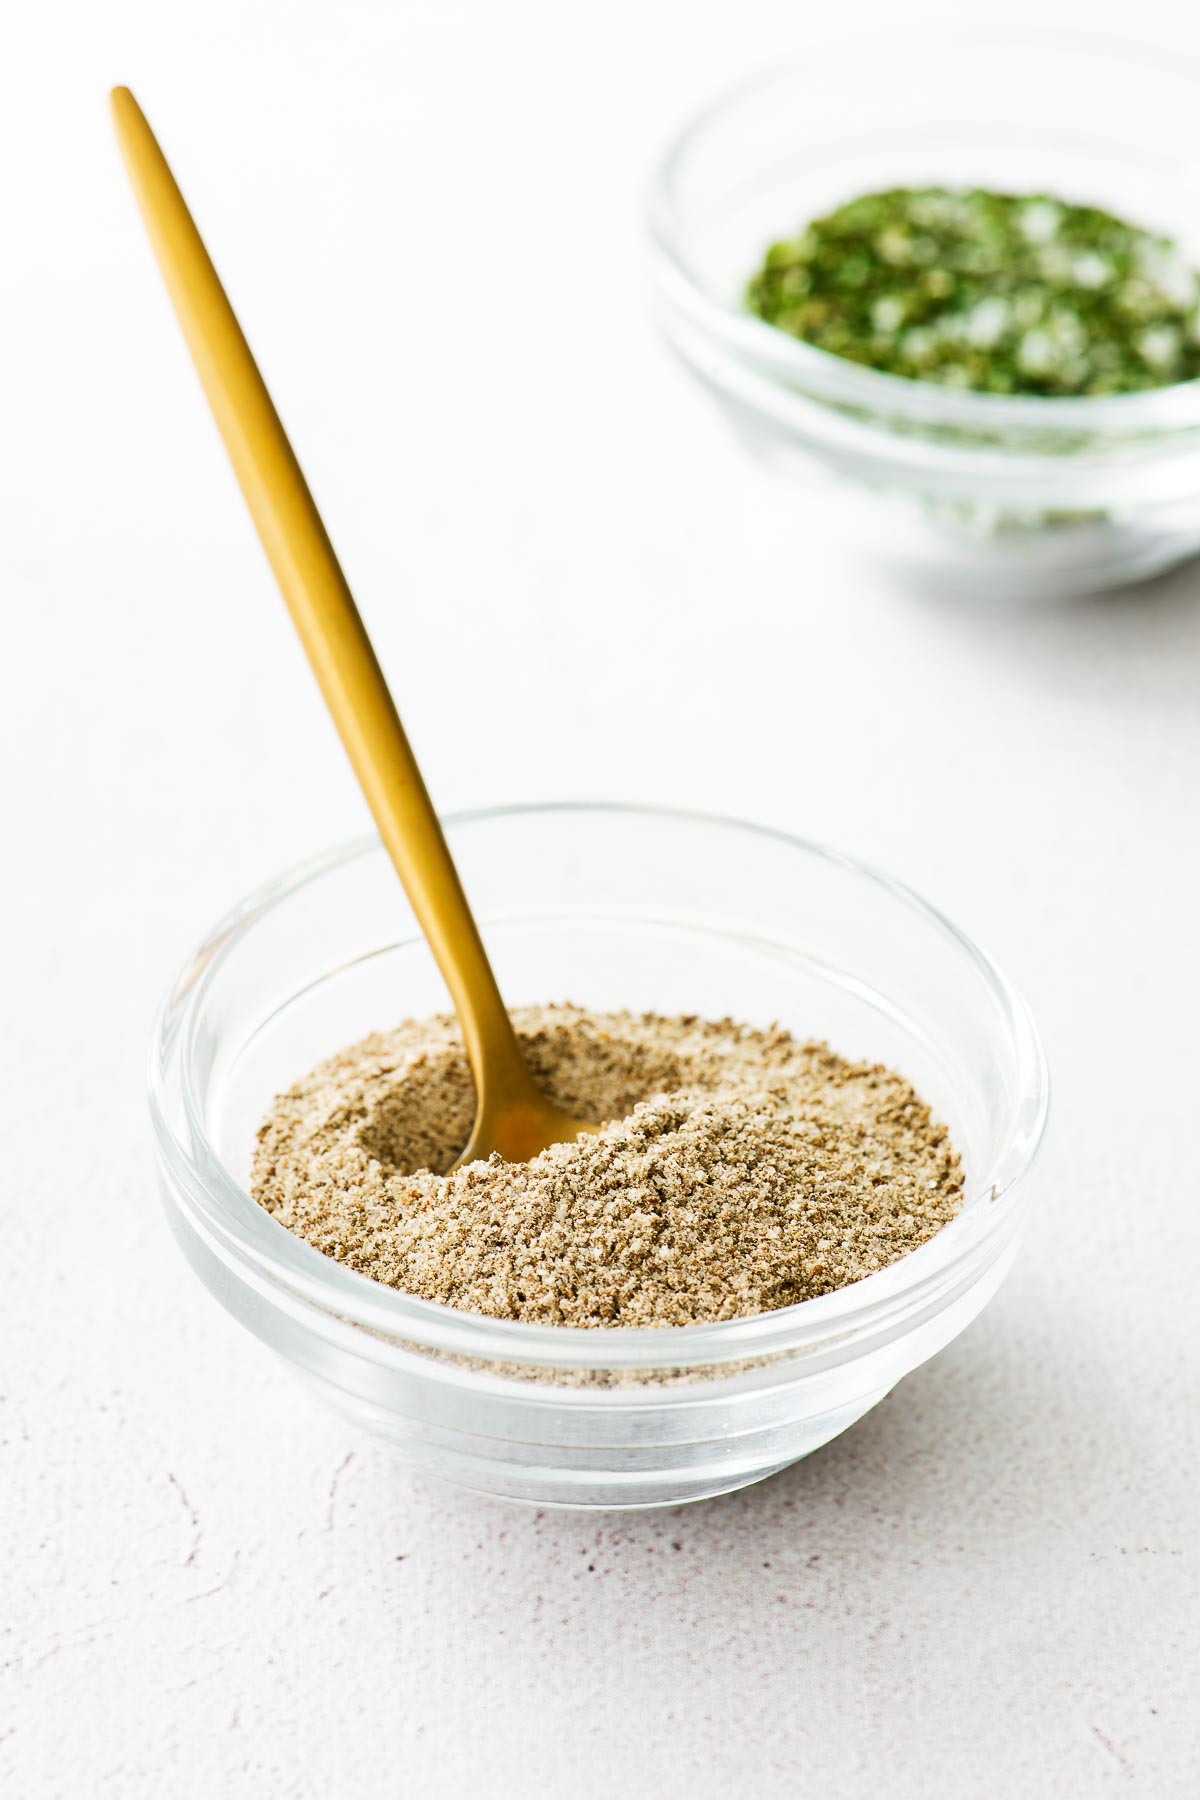 Celery salt substitute made from ground celery seeds and salt in a glass bowl with a golden spoon.